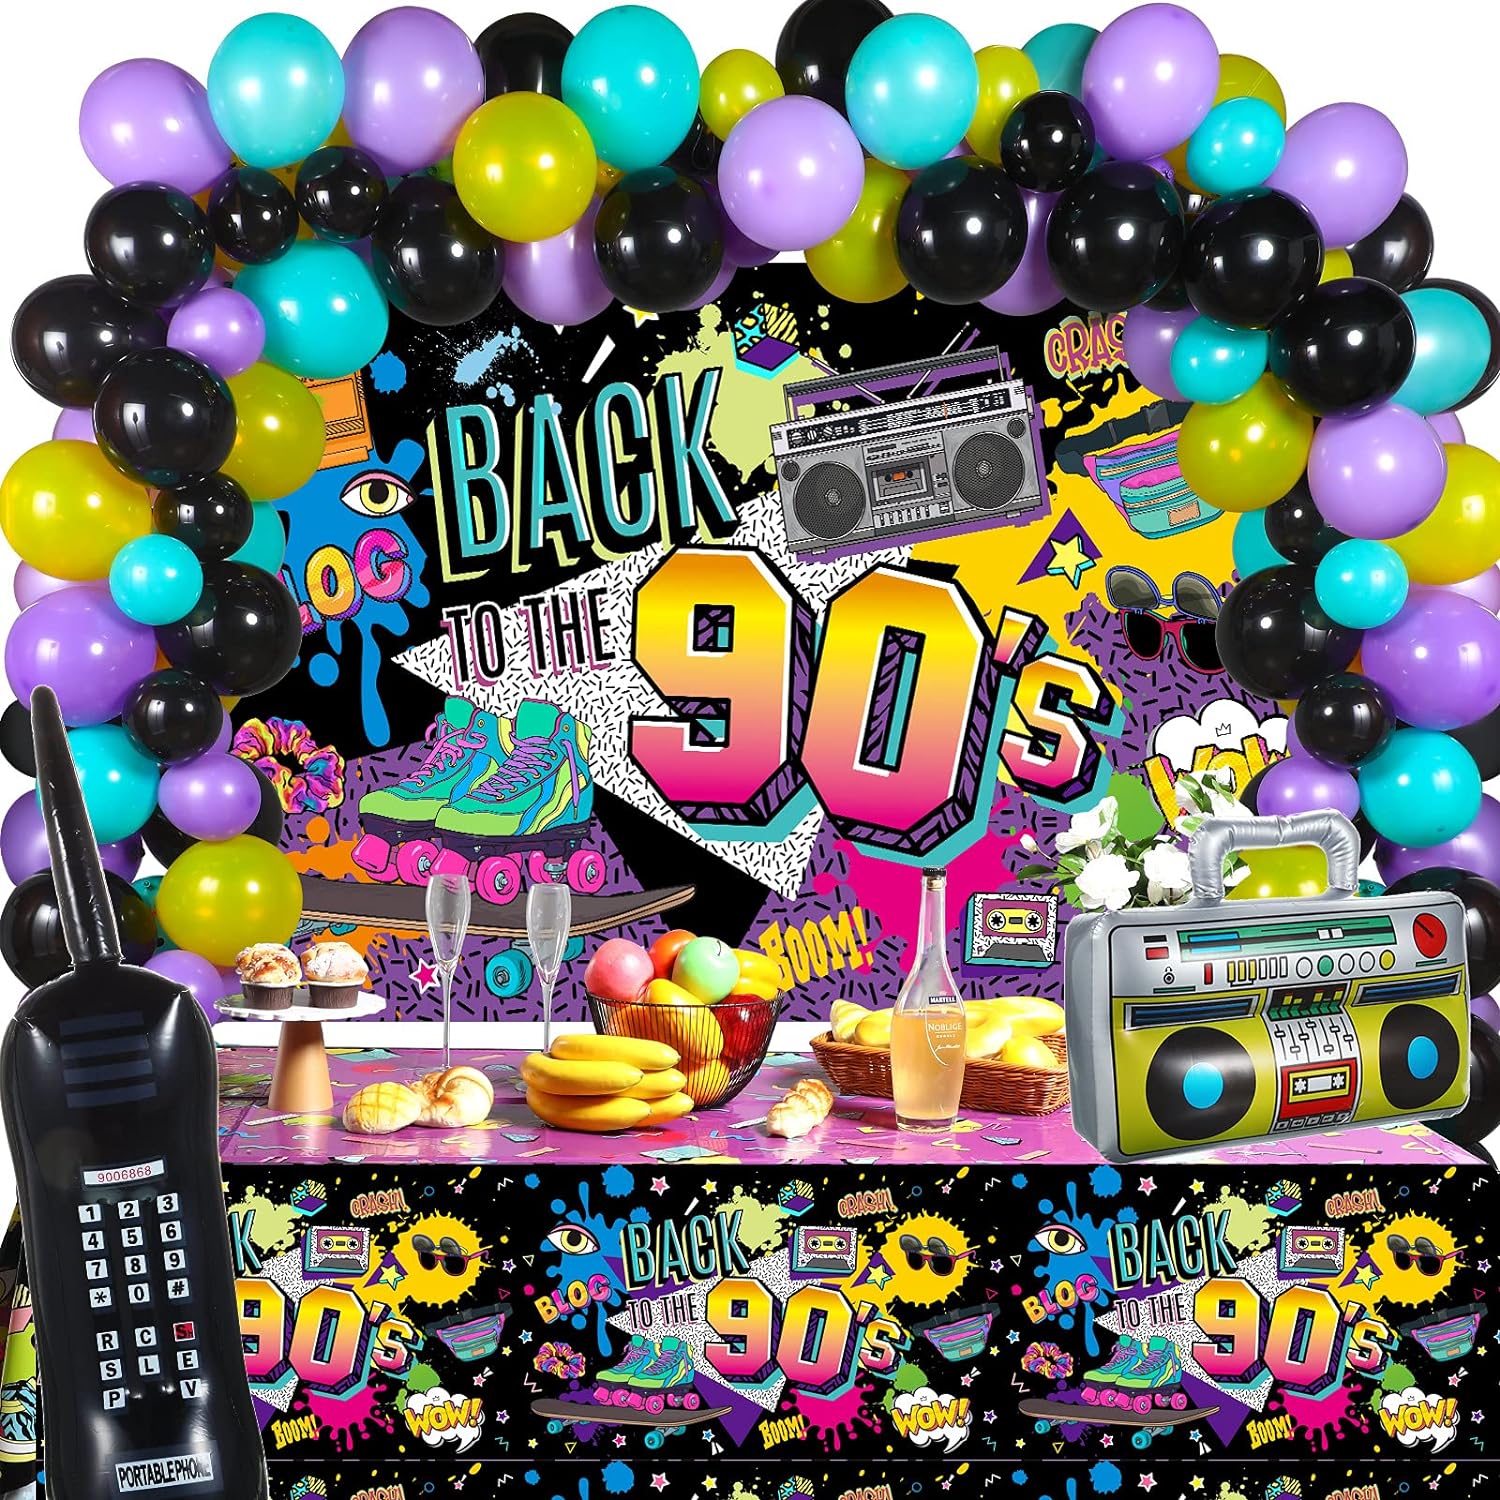 Great Choice Products 80S 90S Party Decorations 80'S 90'S Party Bundle Includes Inflatable Radio Boombox And Mobile Phone, Back To 80S Or 90S Backd…